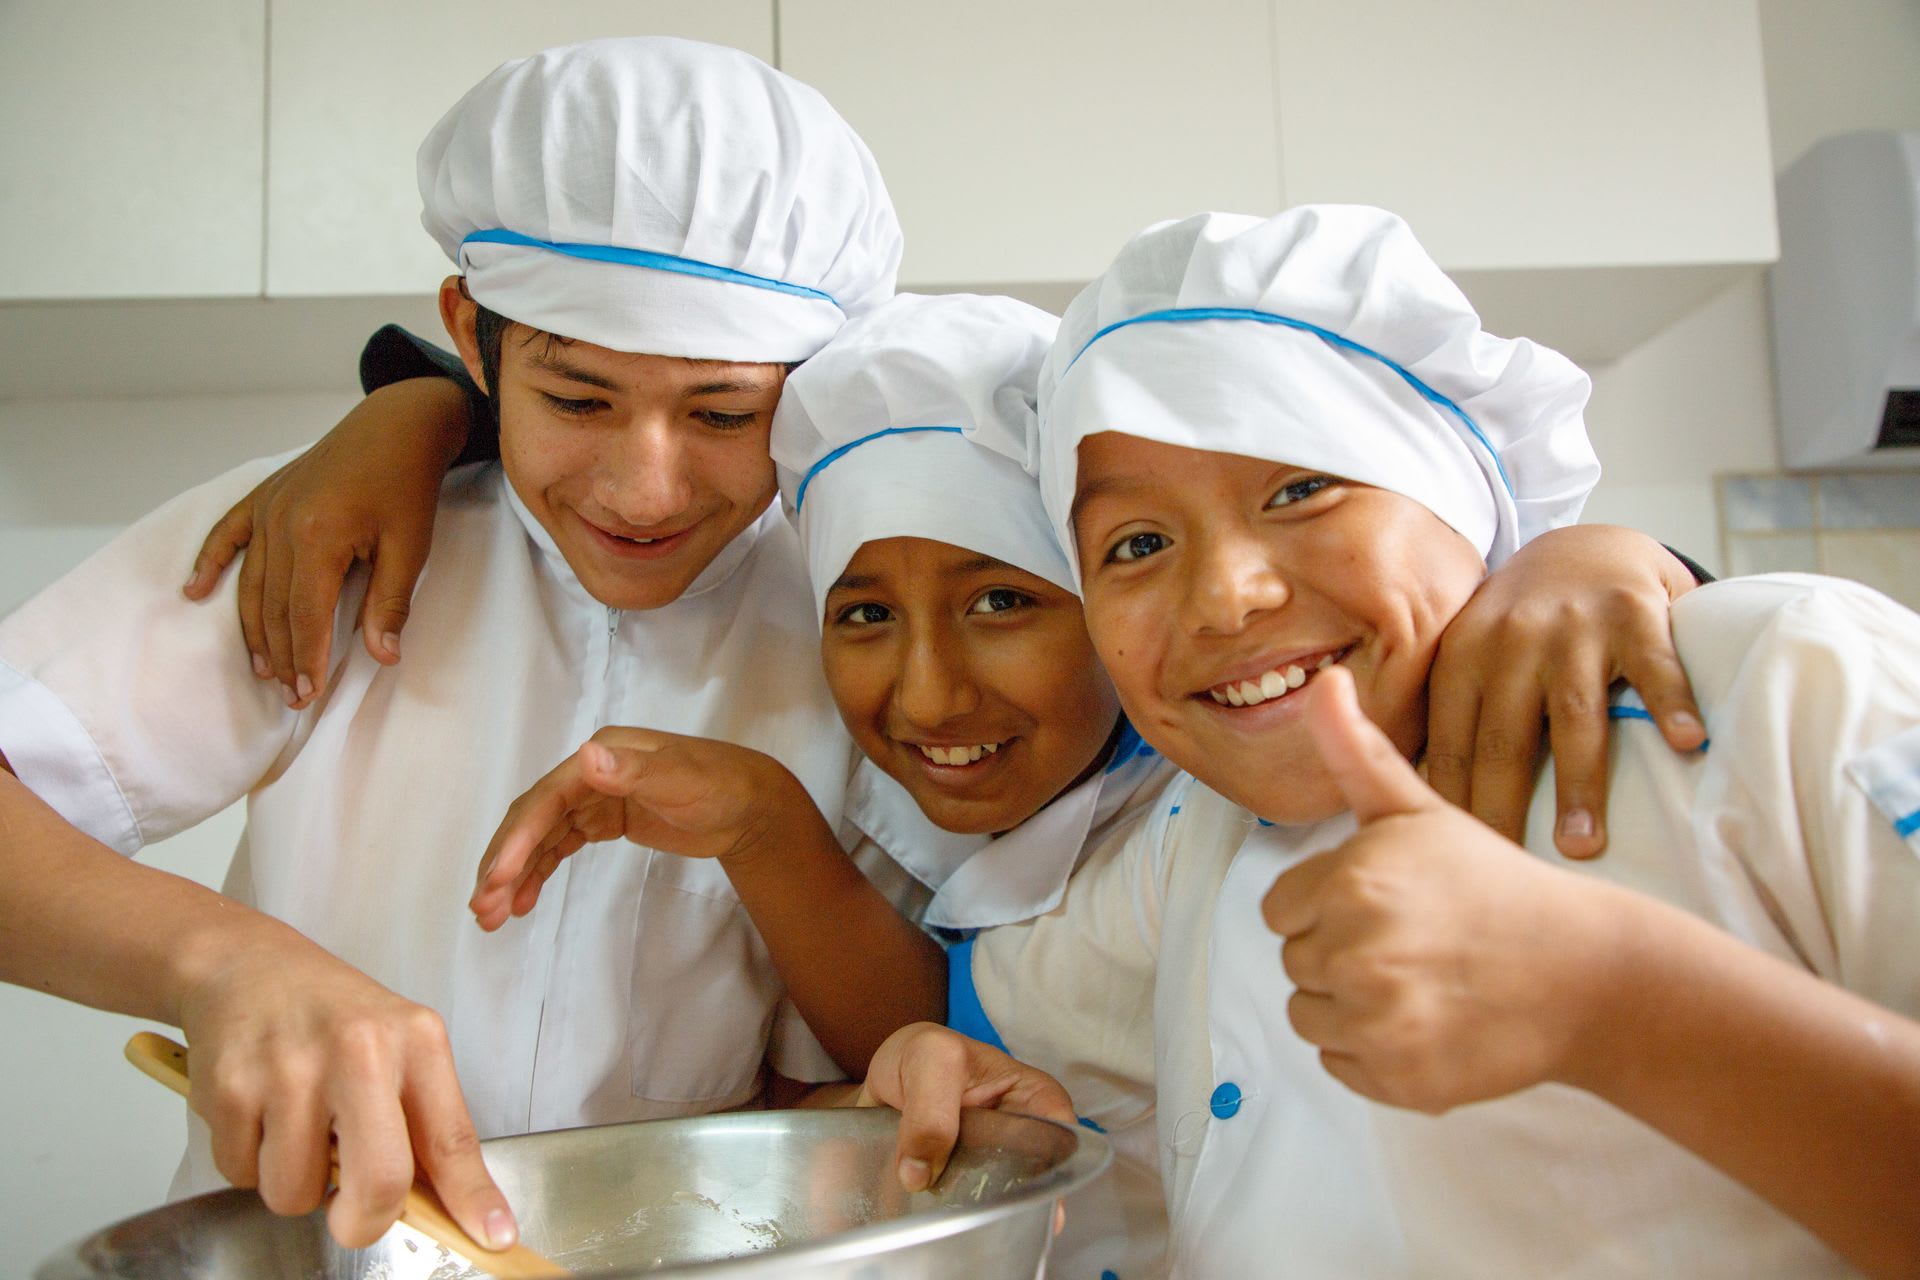 Three boys wearing baker's caps smile with their arms around each other, one giving a thumbs up while another holds a large kitchen bowl.